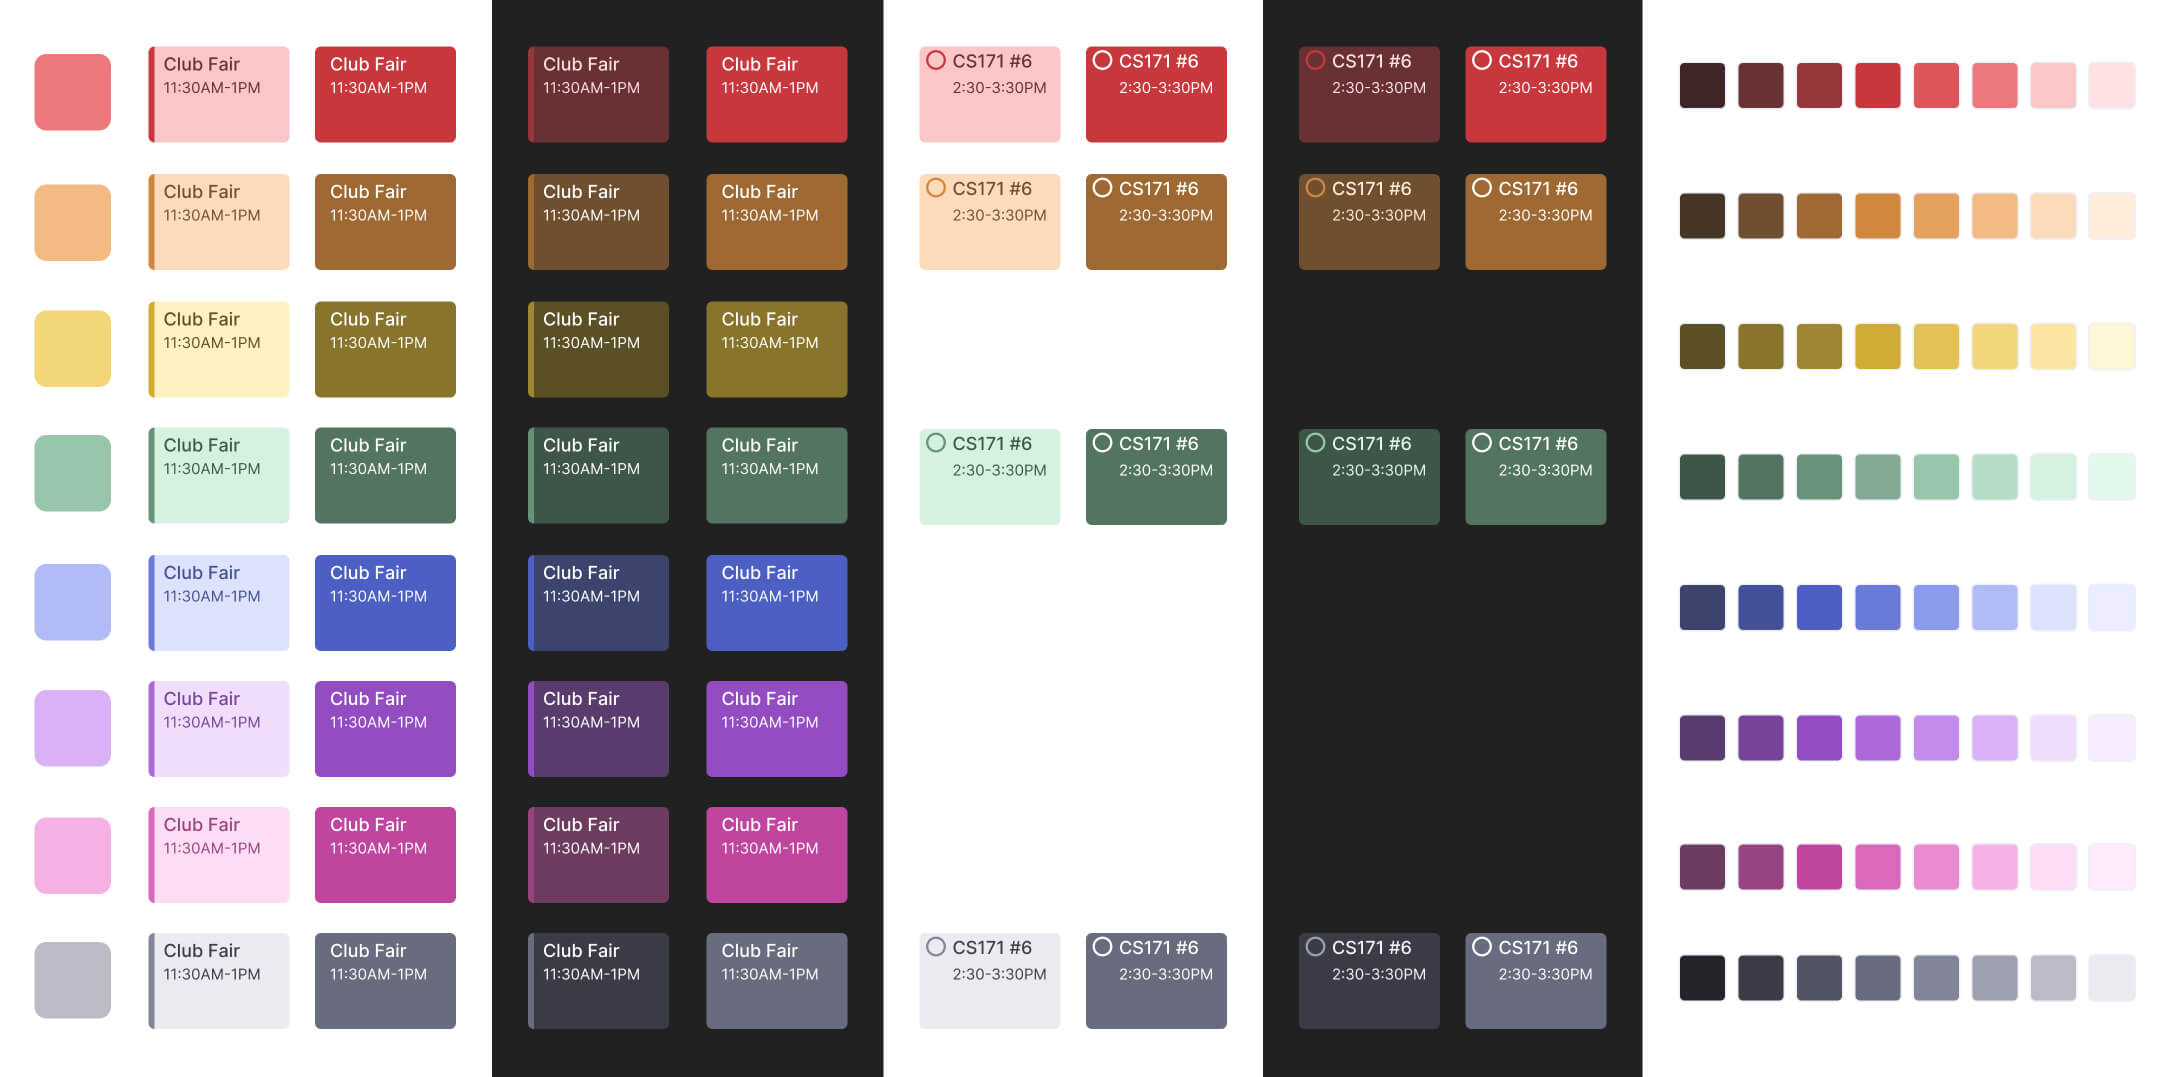 Gallery of the different colors designed for the calendar block